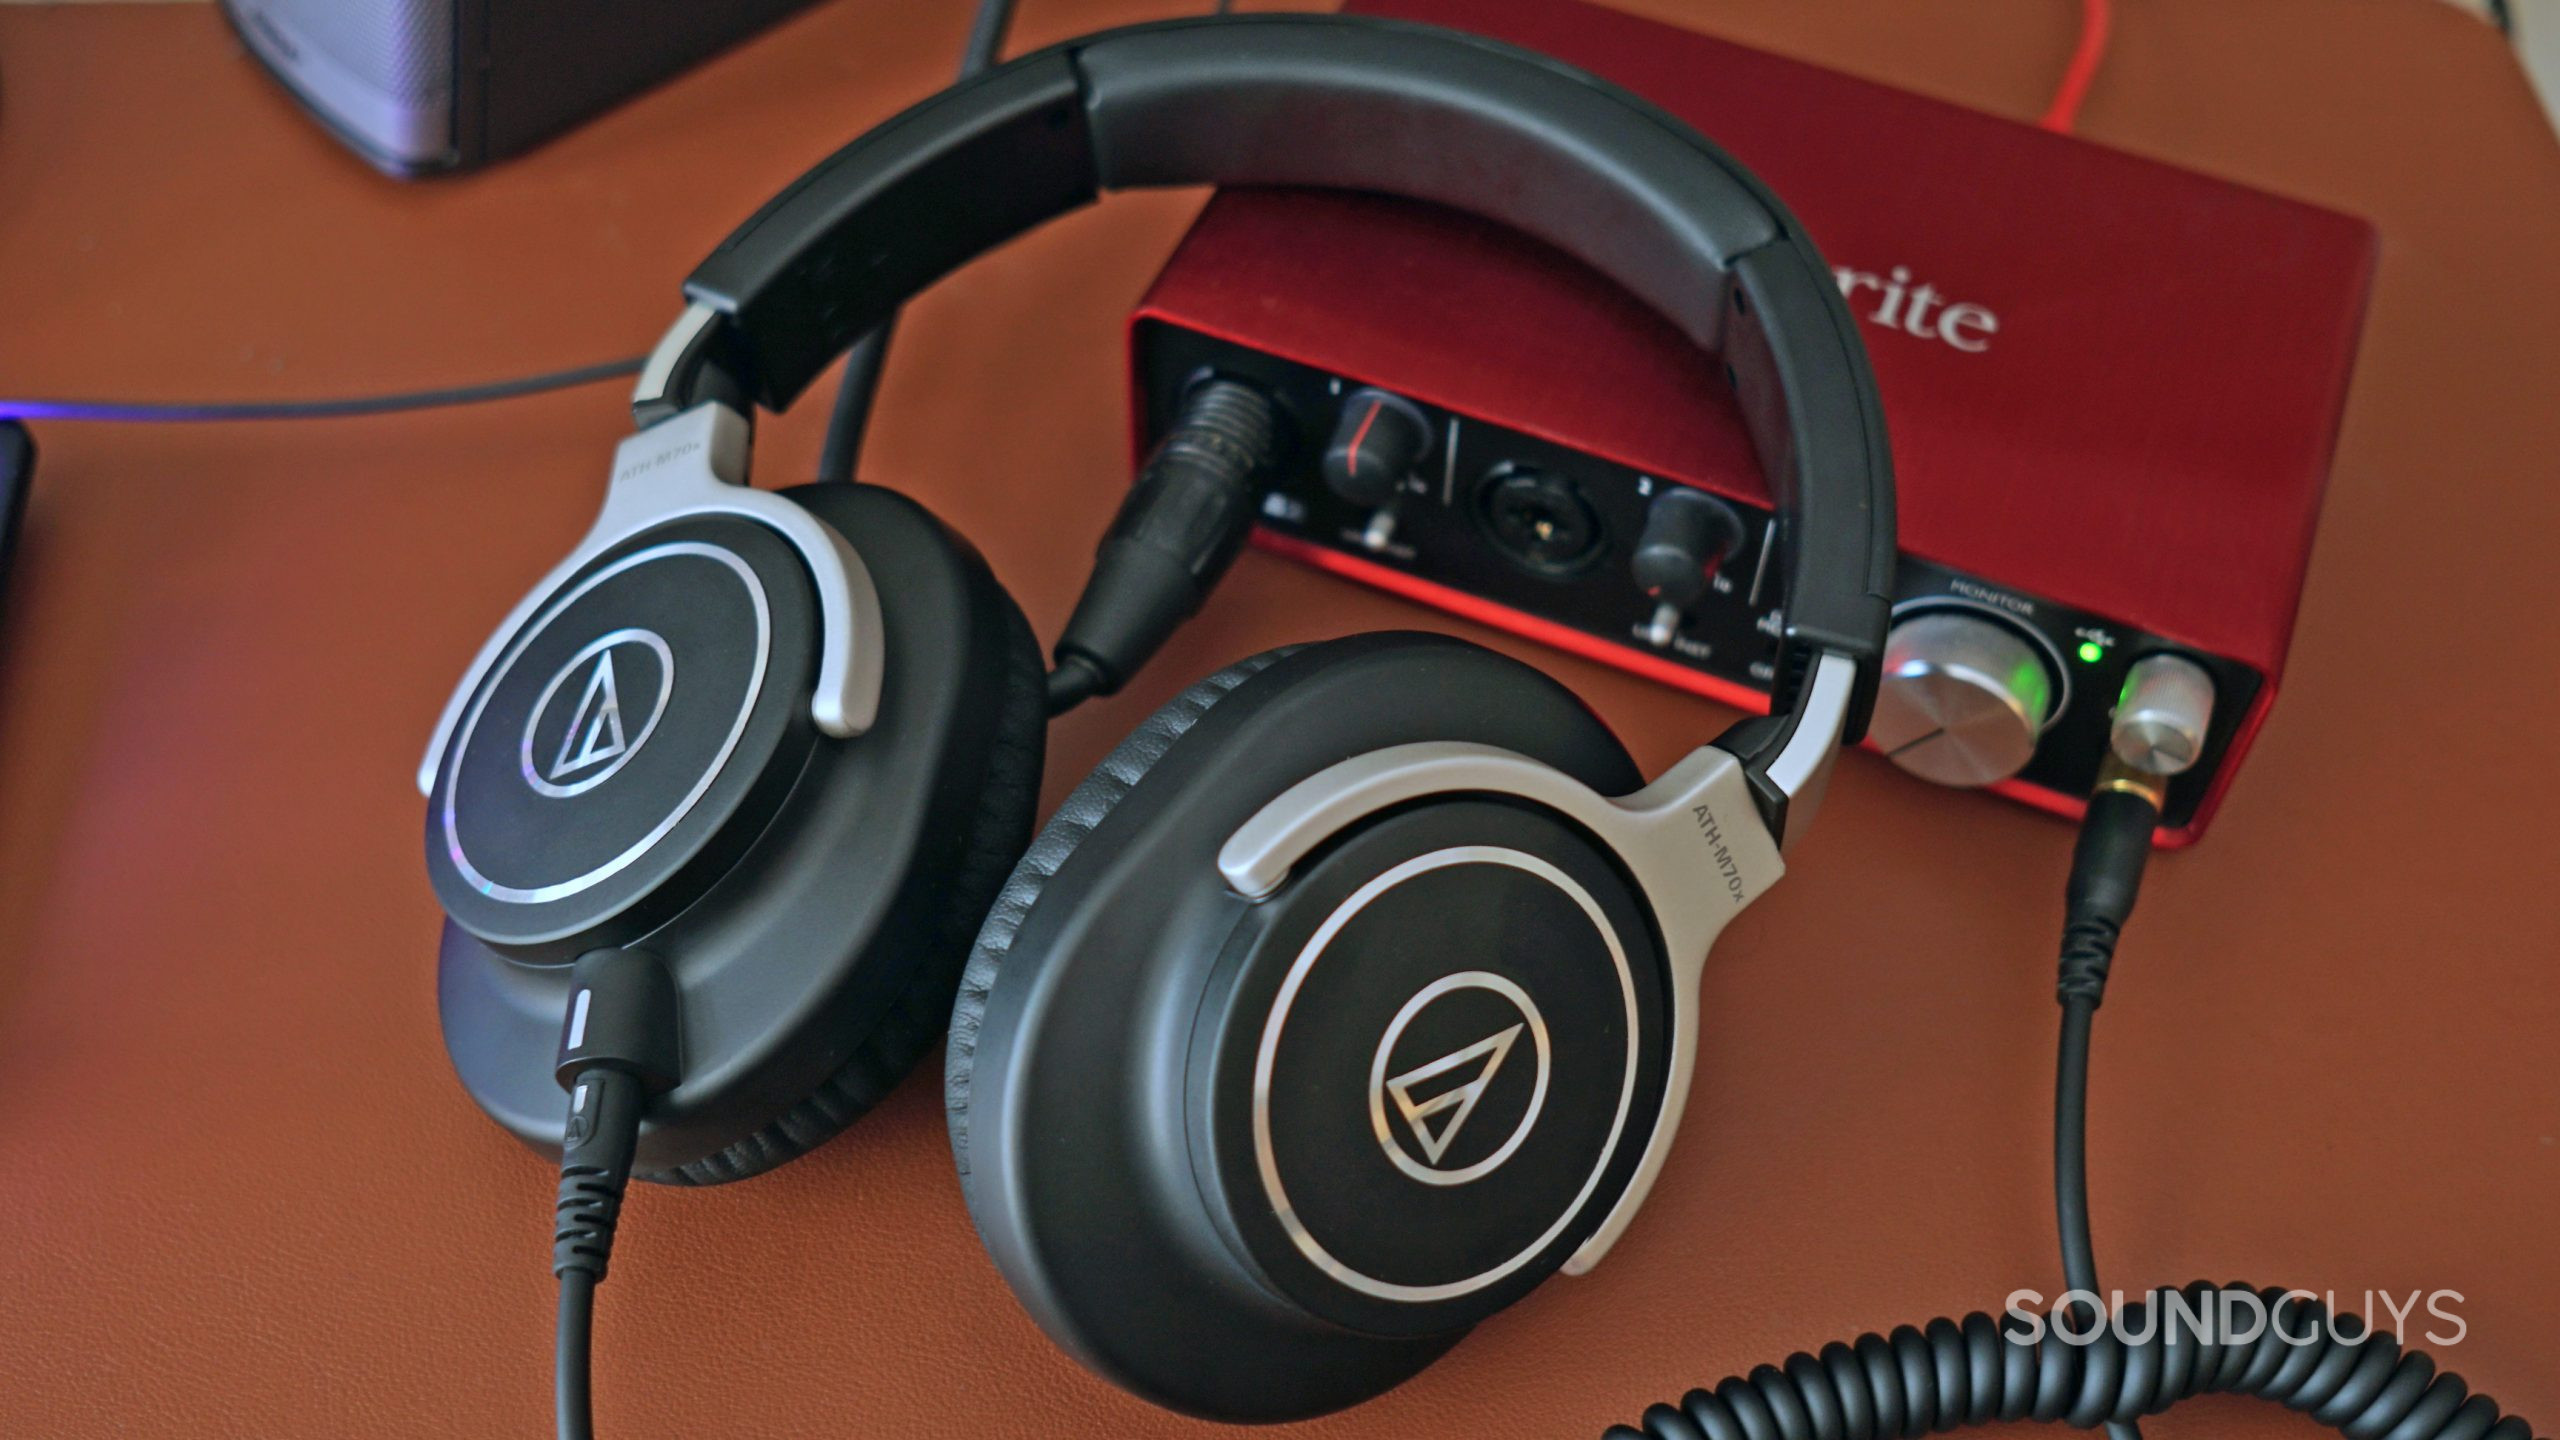 The Audio-Technica ATH-M70x lays on a Focusrite Scarlett 2i2 which it's plugged into.